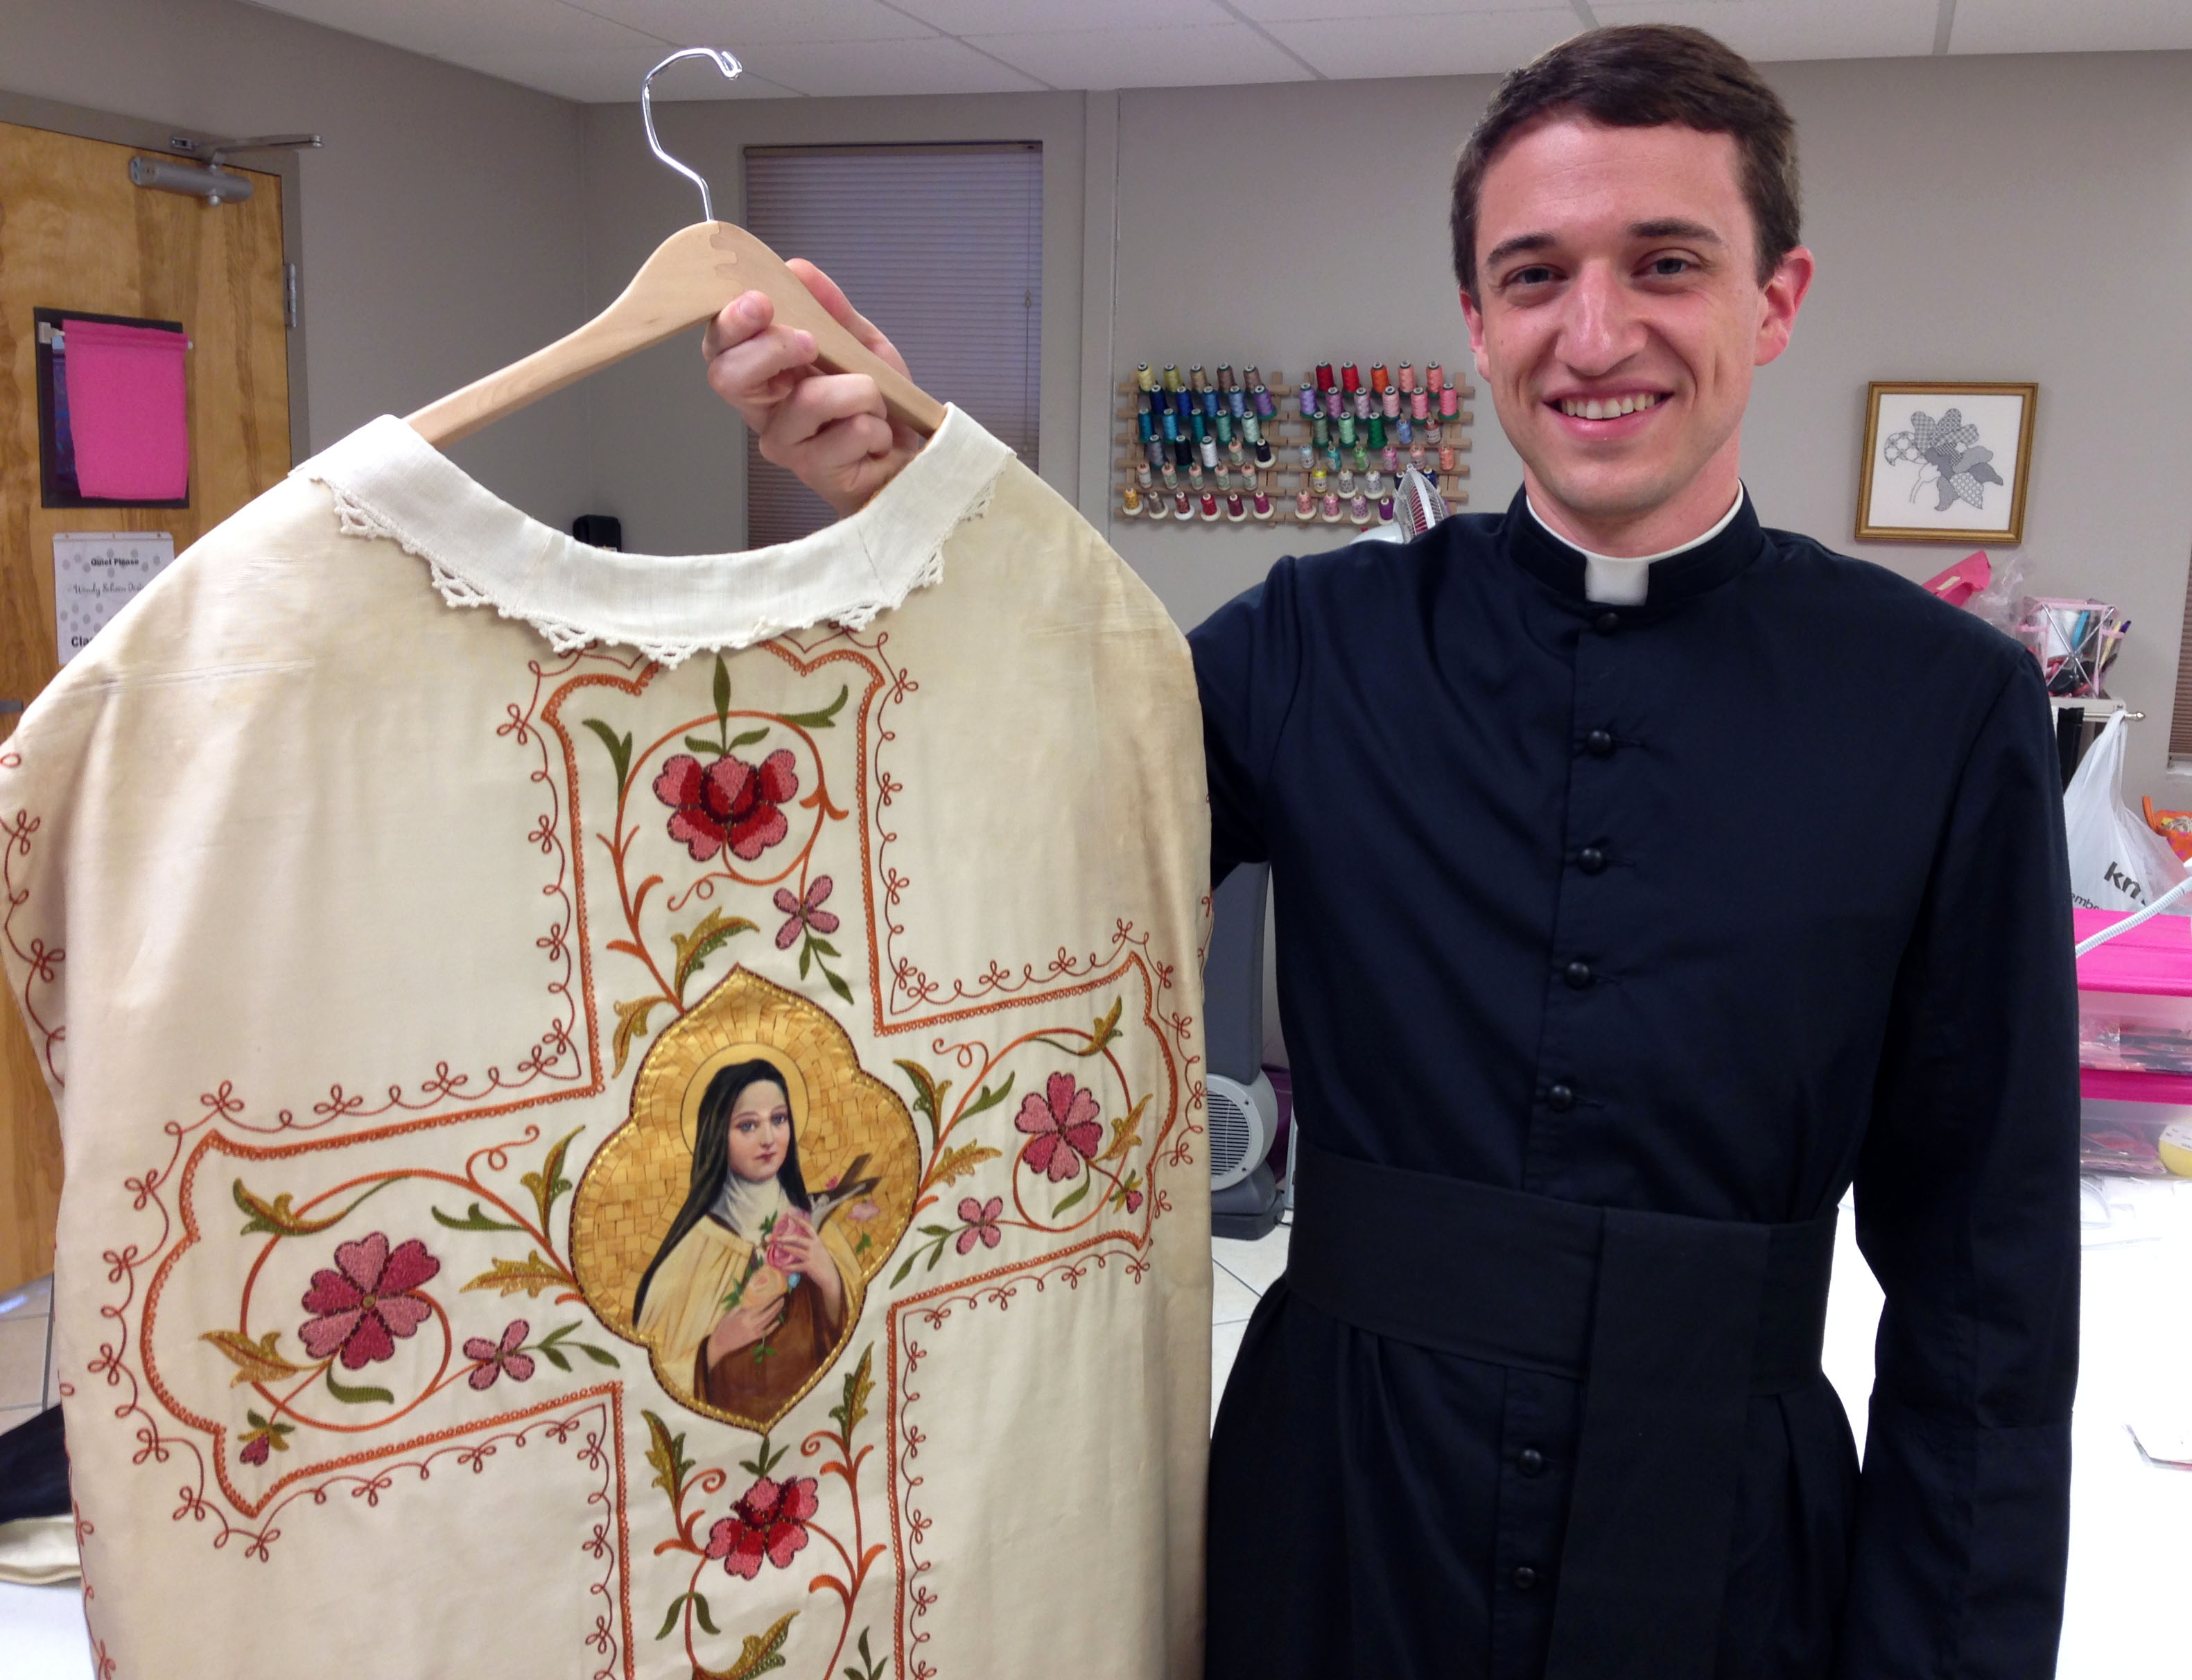 Fr. Garett O'Brien with his antique hand embroidered vestment with thread painting an goldwork.